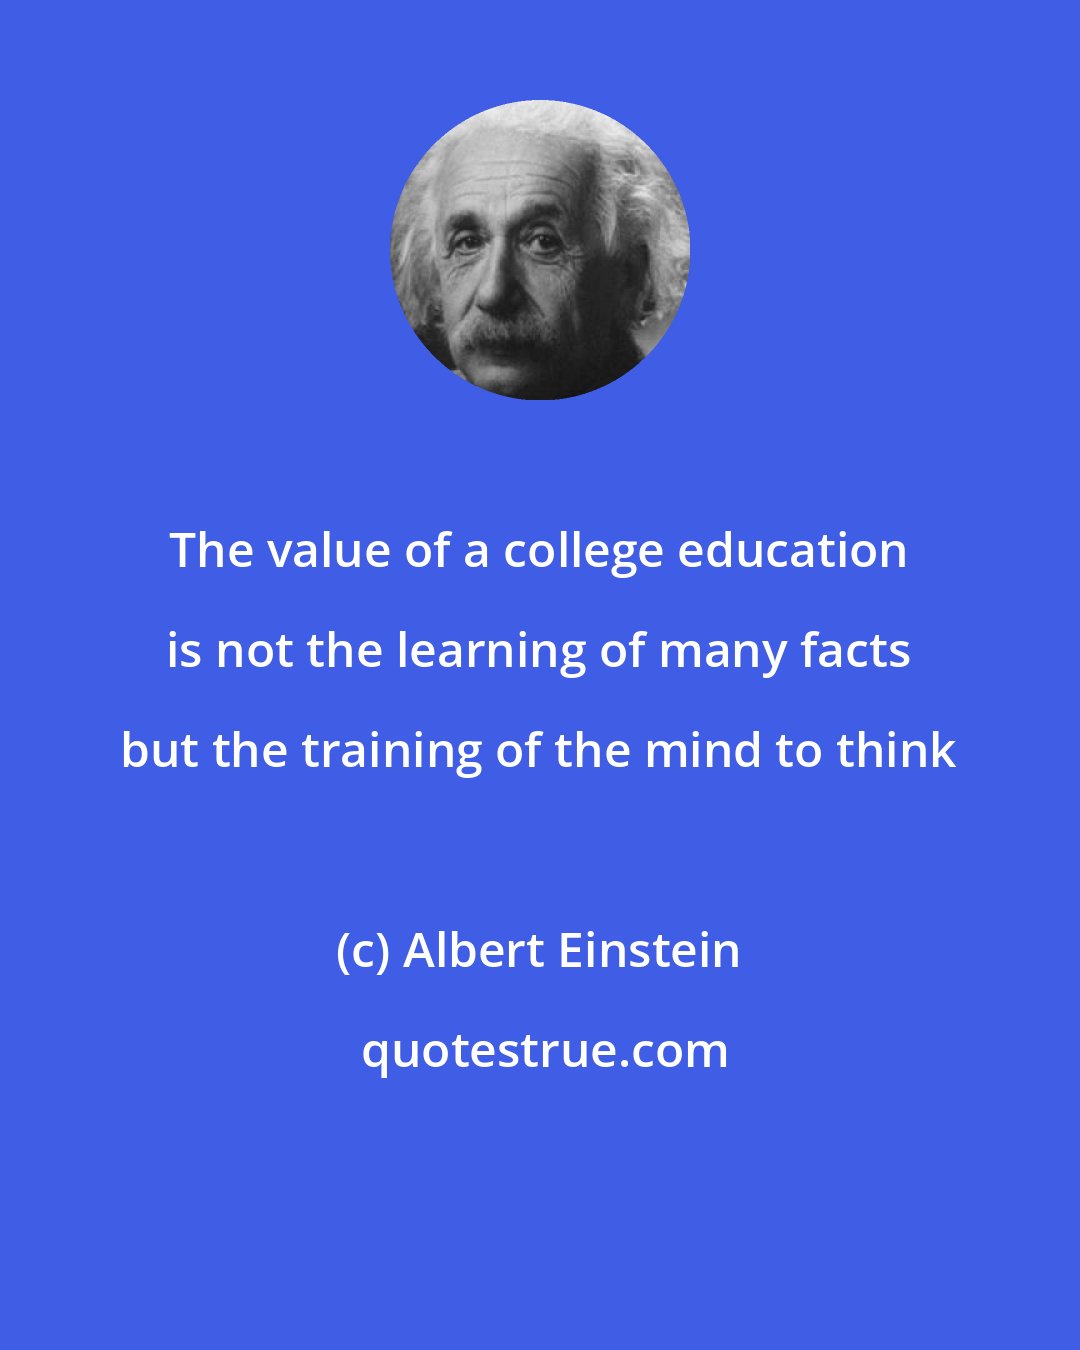 Albert Einstein: The value of a college education is not the learning of many facts but the training of the mind to think